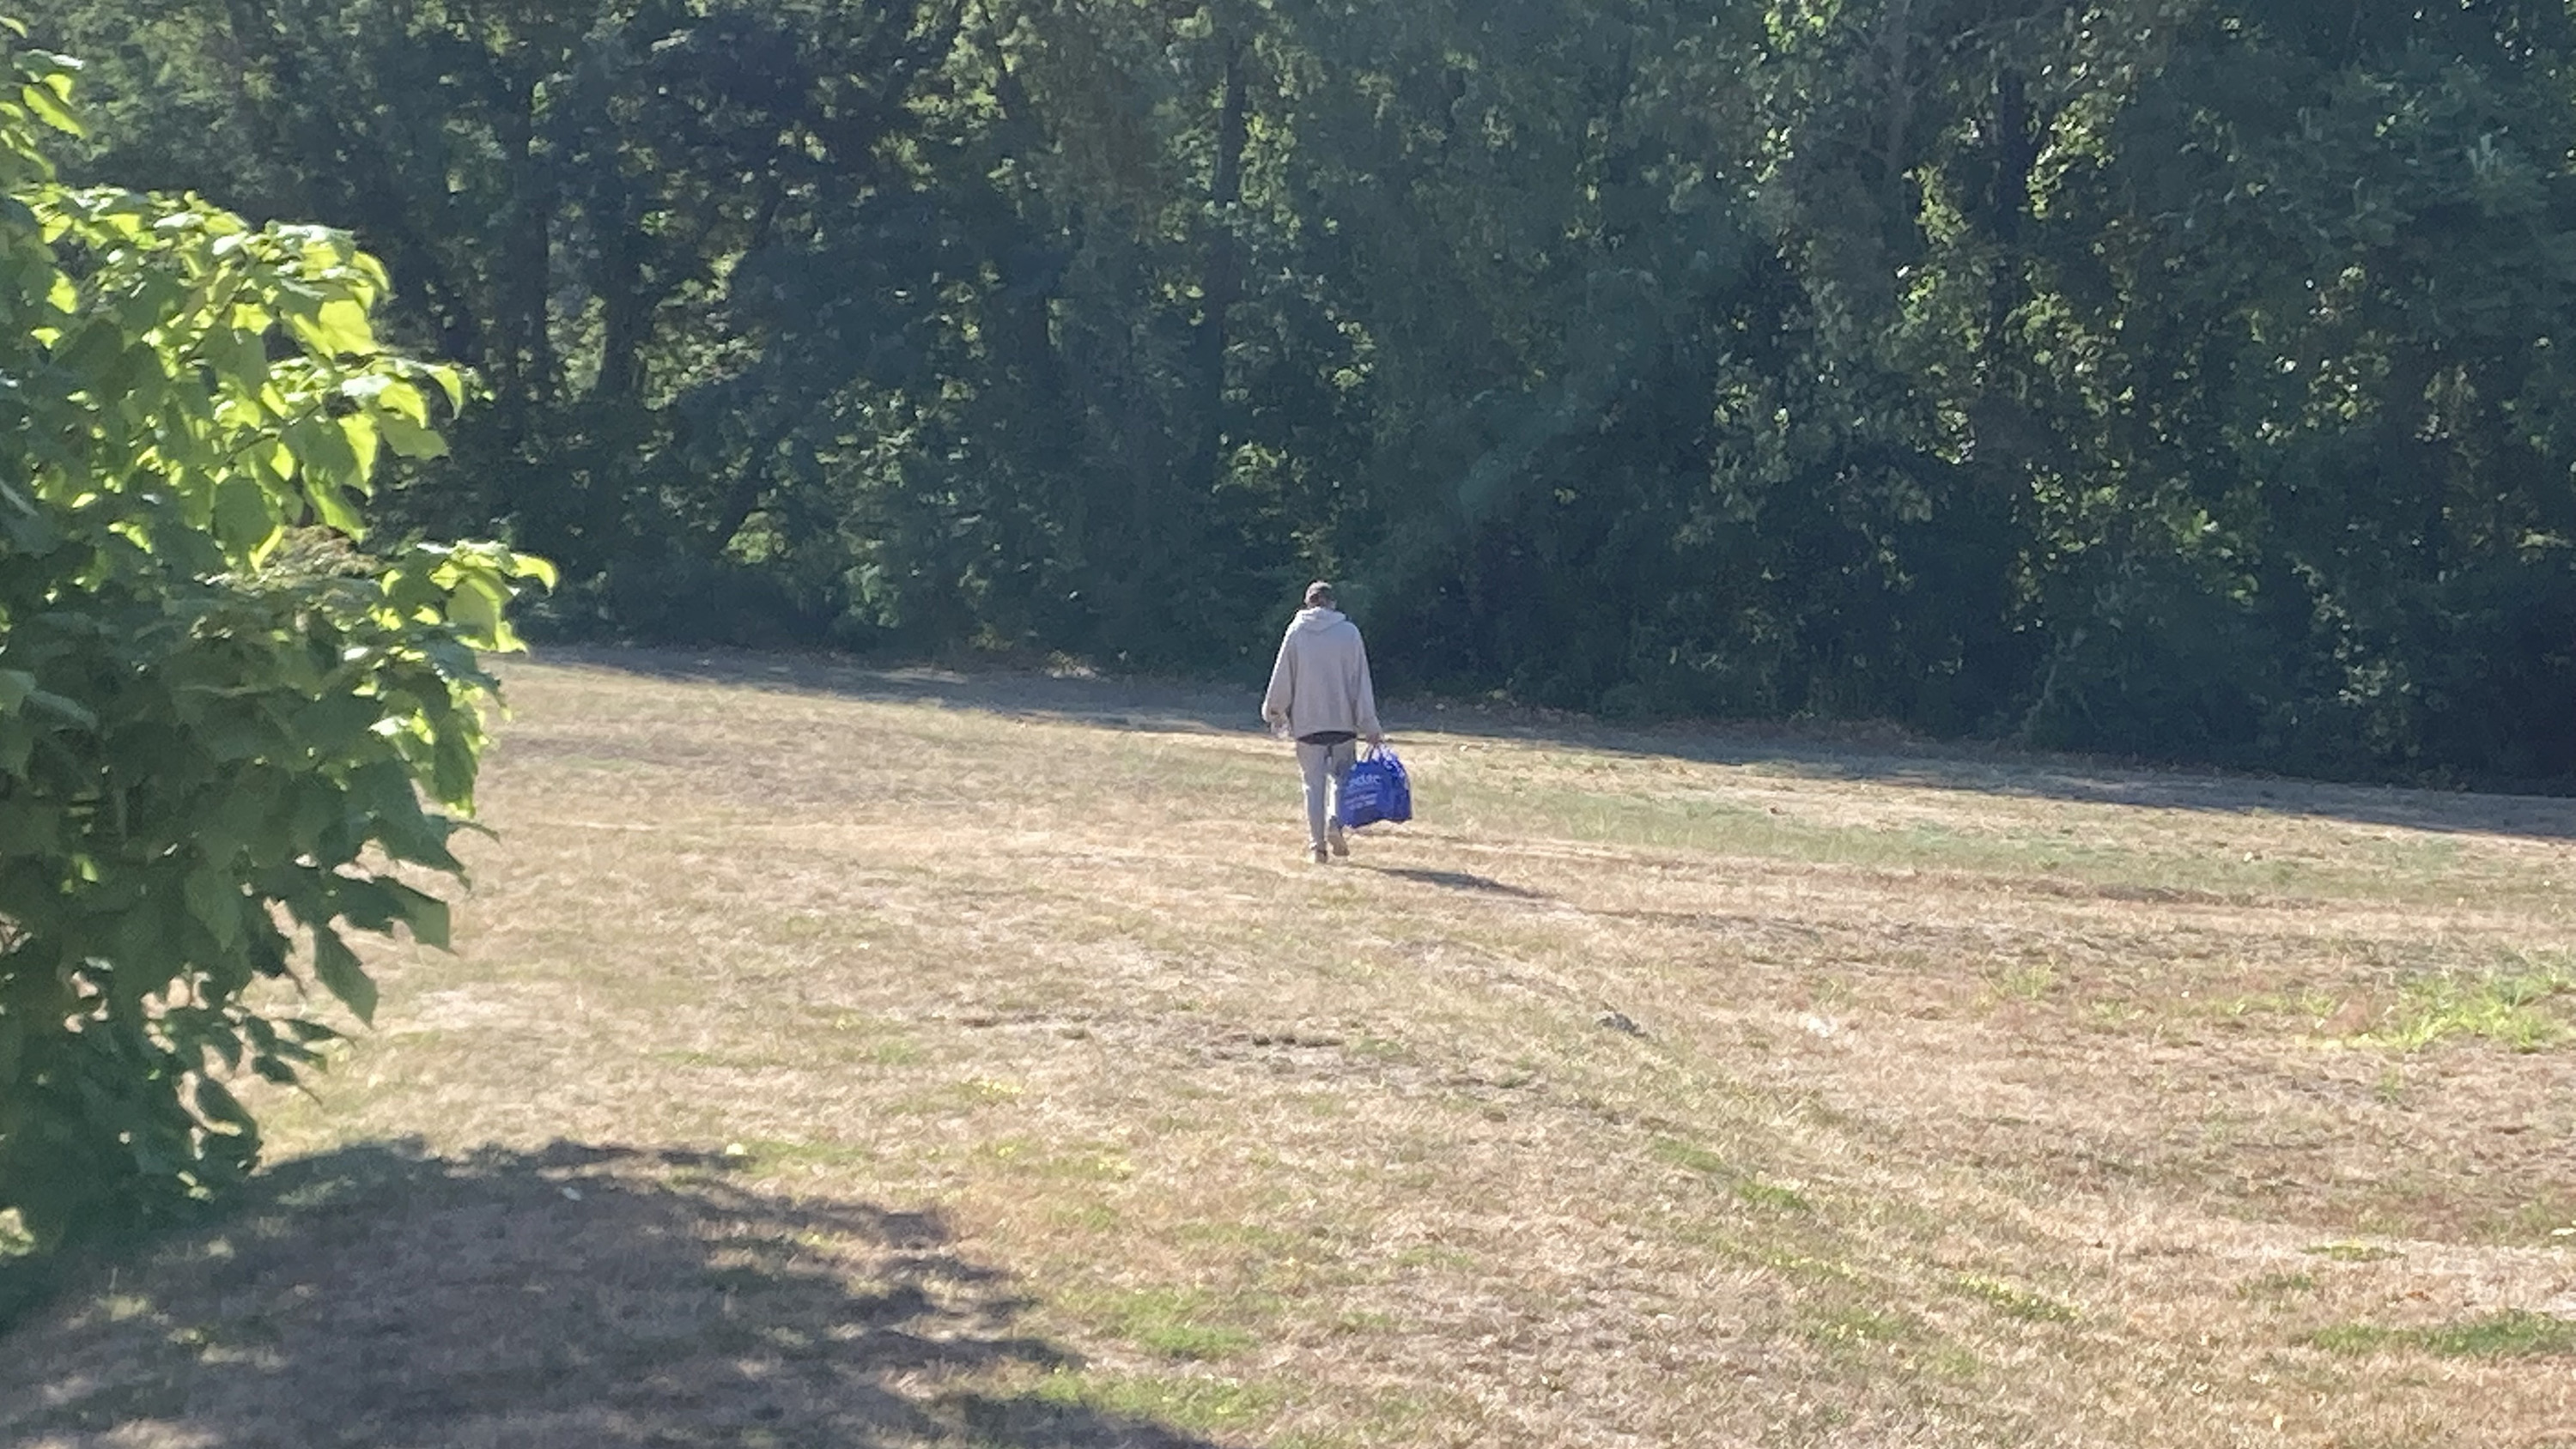 Cory heads back to his tent encampment with a bag containing naloxone and other harm reduction supplies from CODAC's mobile clinic.